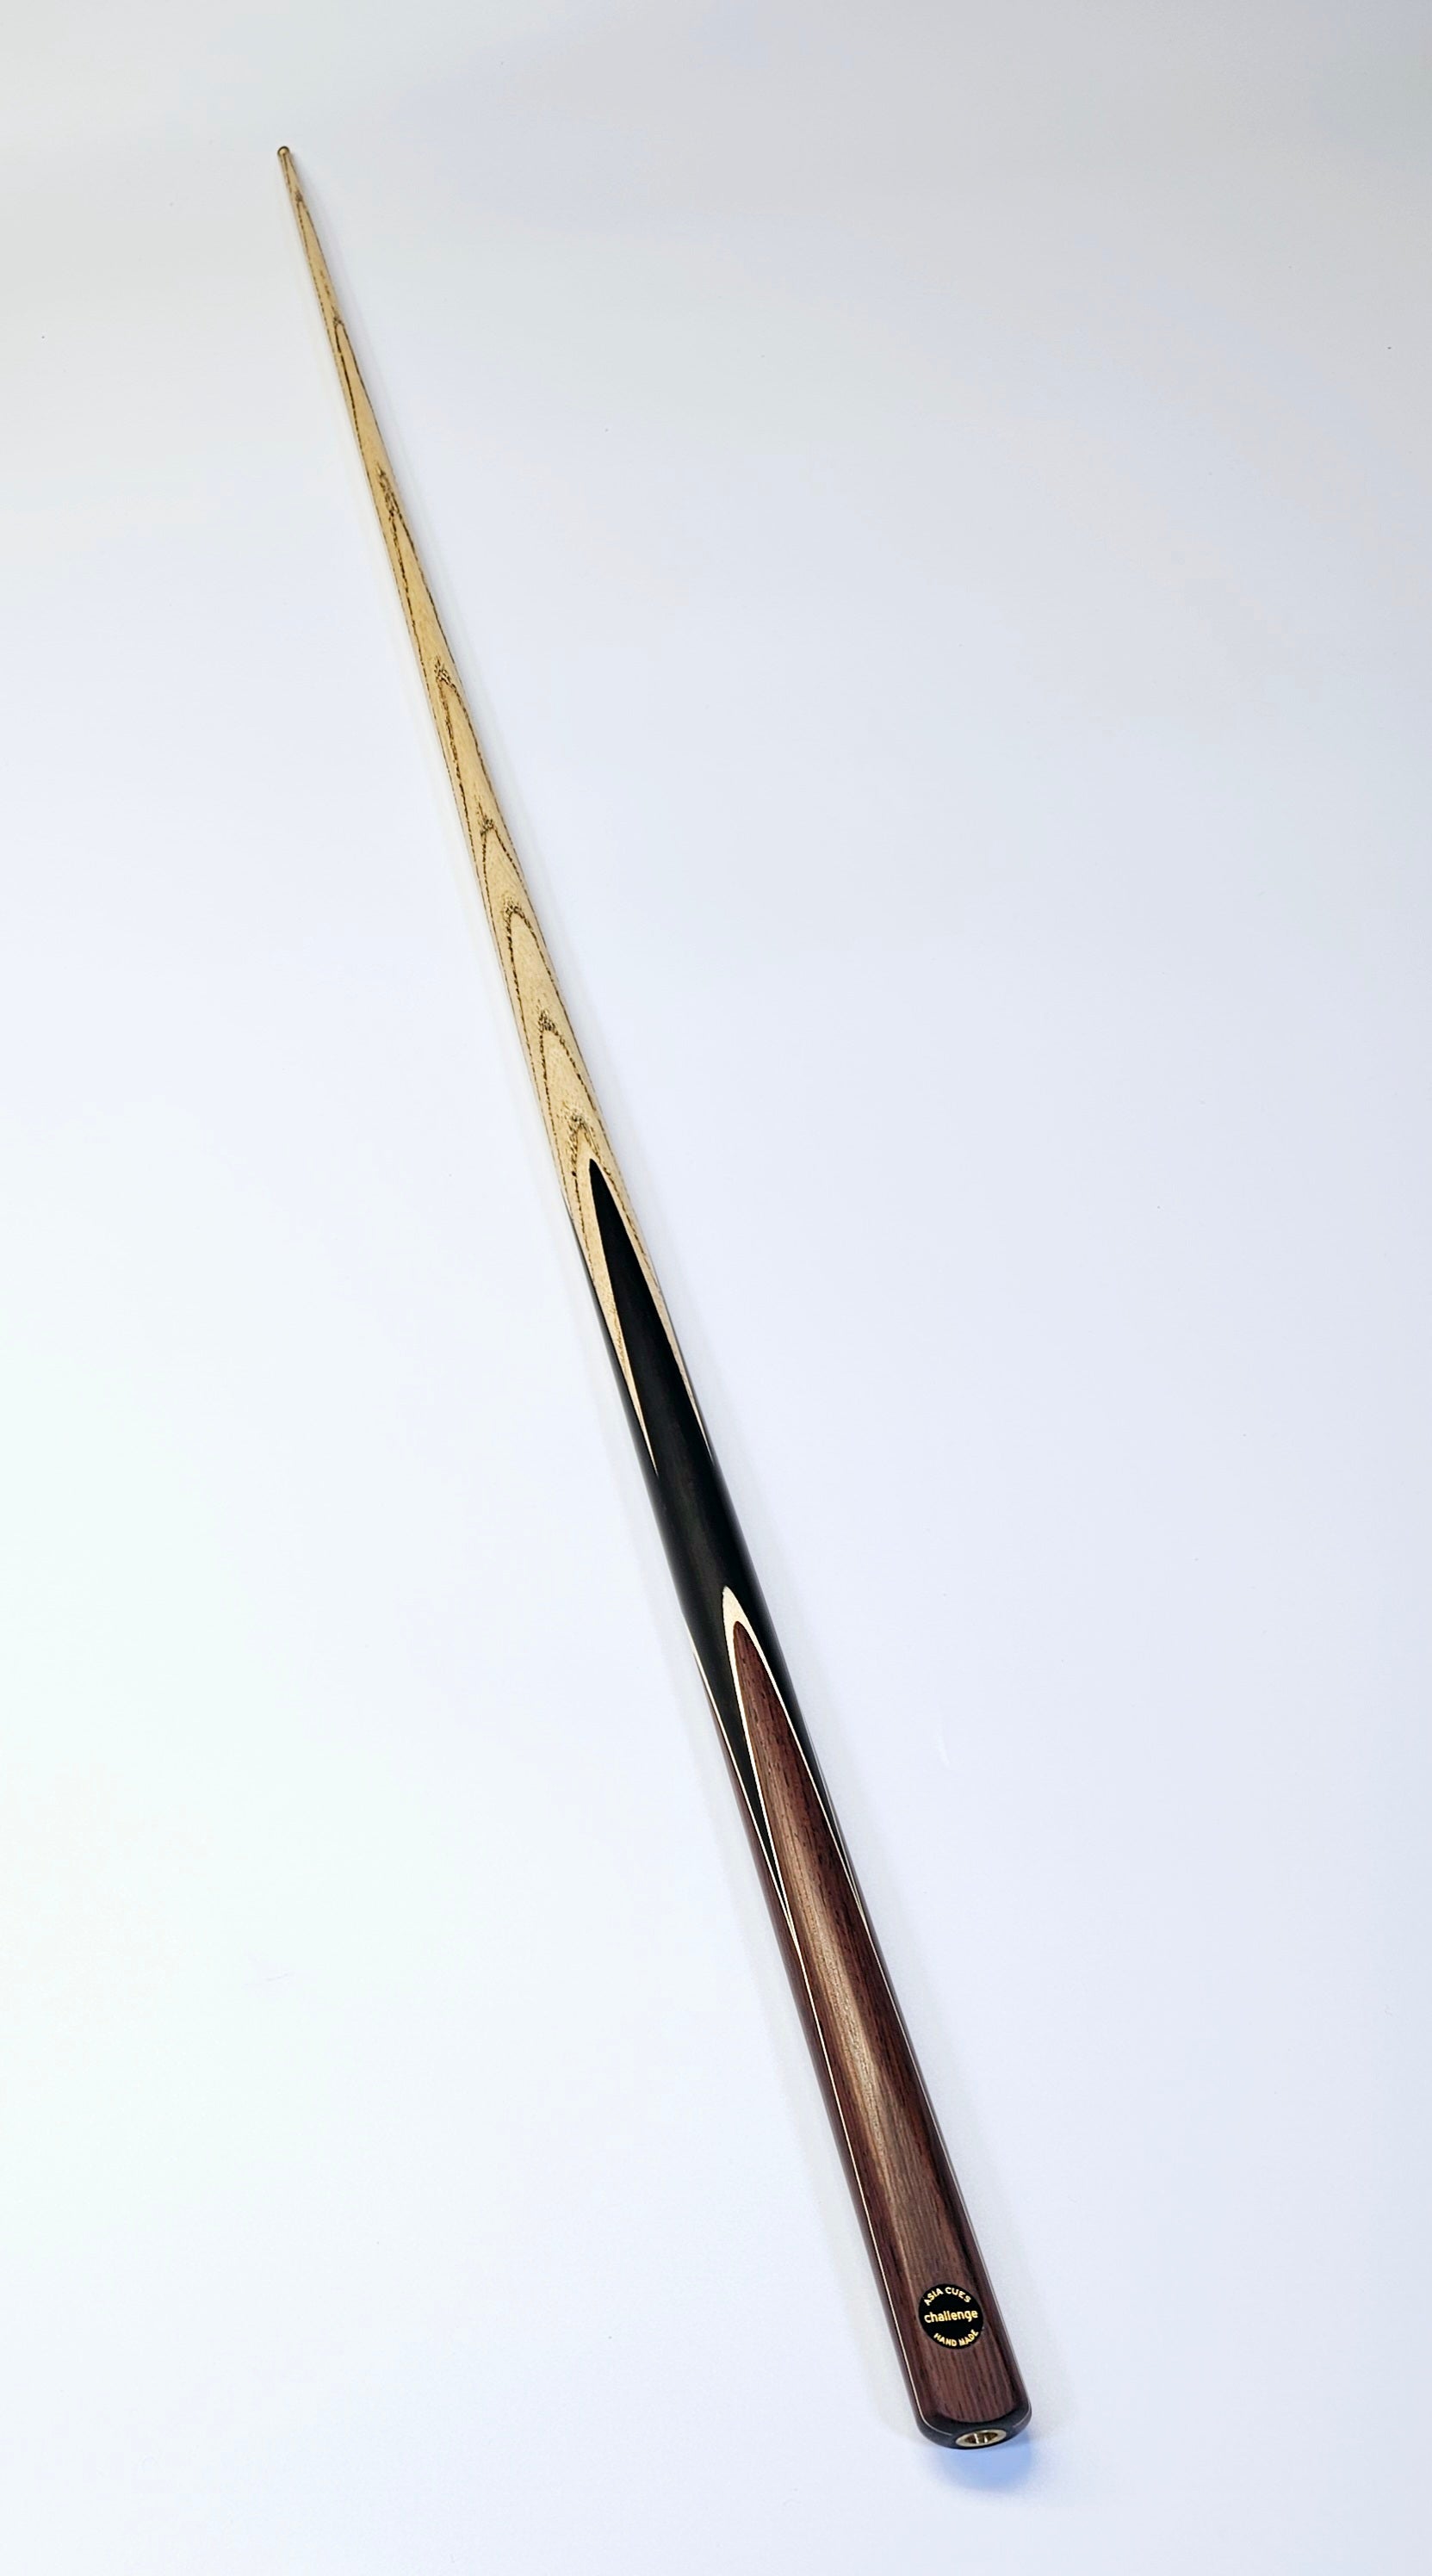 Asia Cues Challenge - One Piece Pool Cue 9.1mm Tip, 18oz, 58"